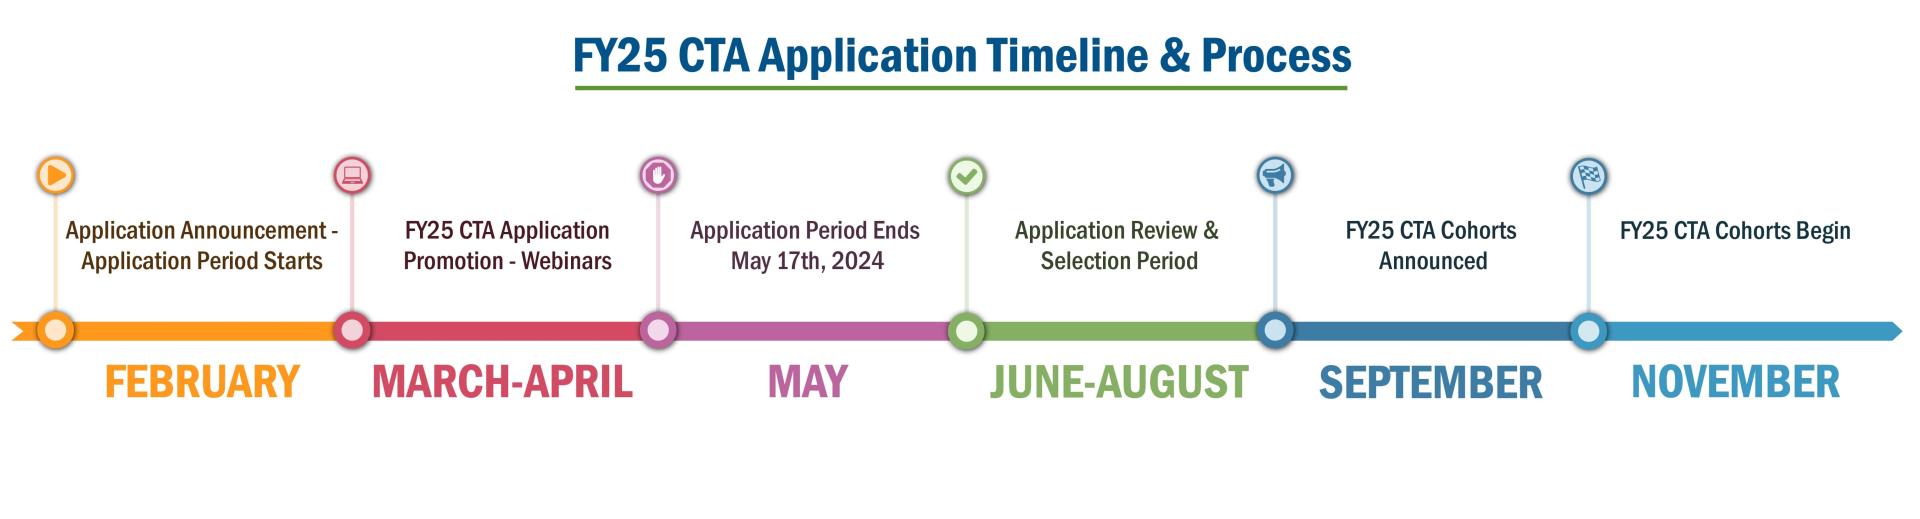 FY25 CTA Application Timeline & Process from February, when the application period starts, to November, when FY25 CTA cohorts begin